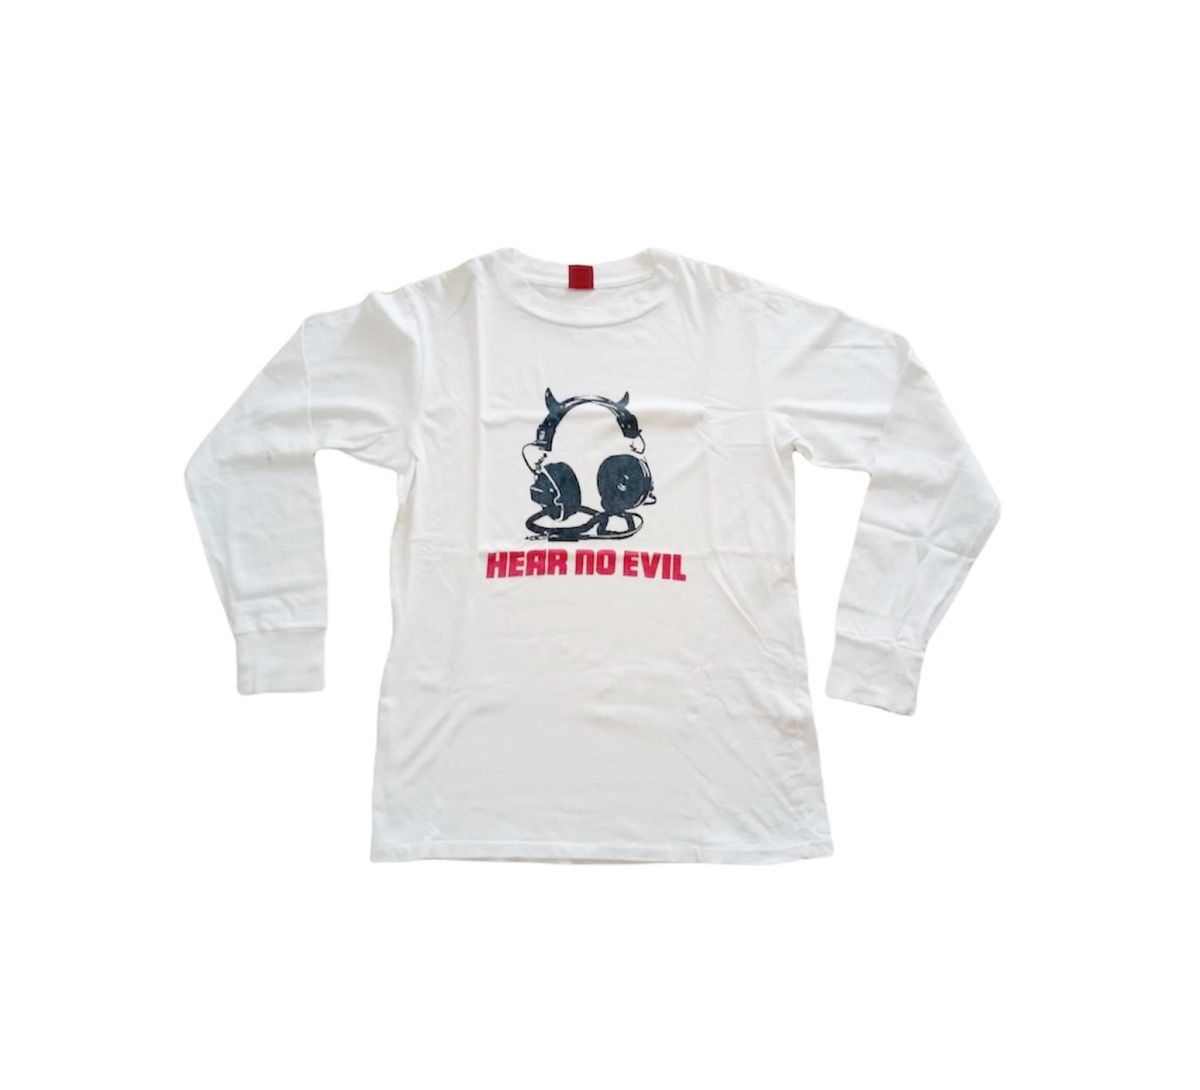 Pre-owned Archival Clothing X Hysteric Glamour Vintage Hysteric Glamour Shirt Hear No Evil Long In White